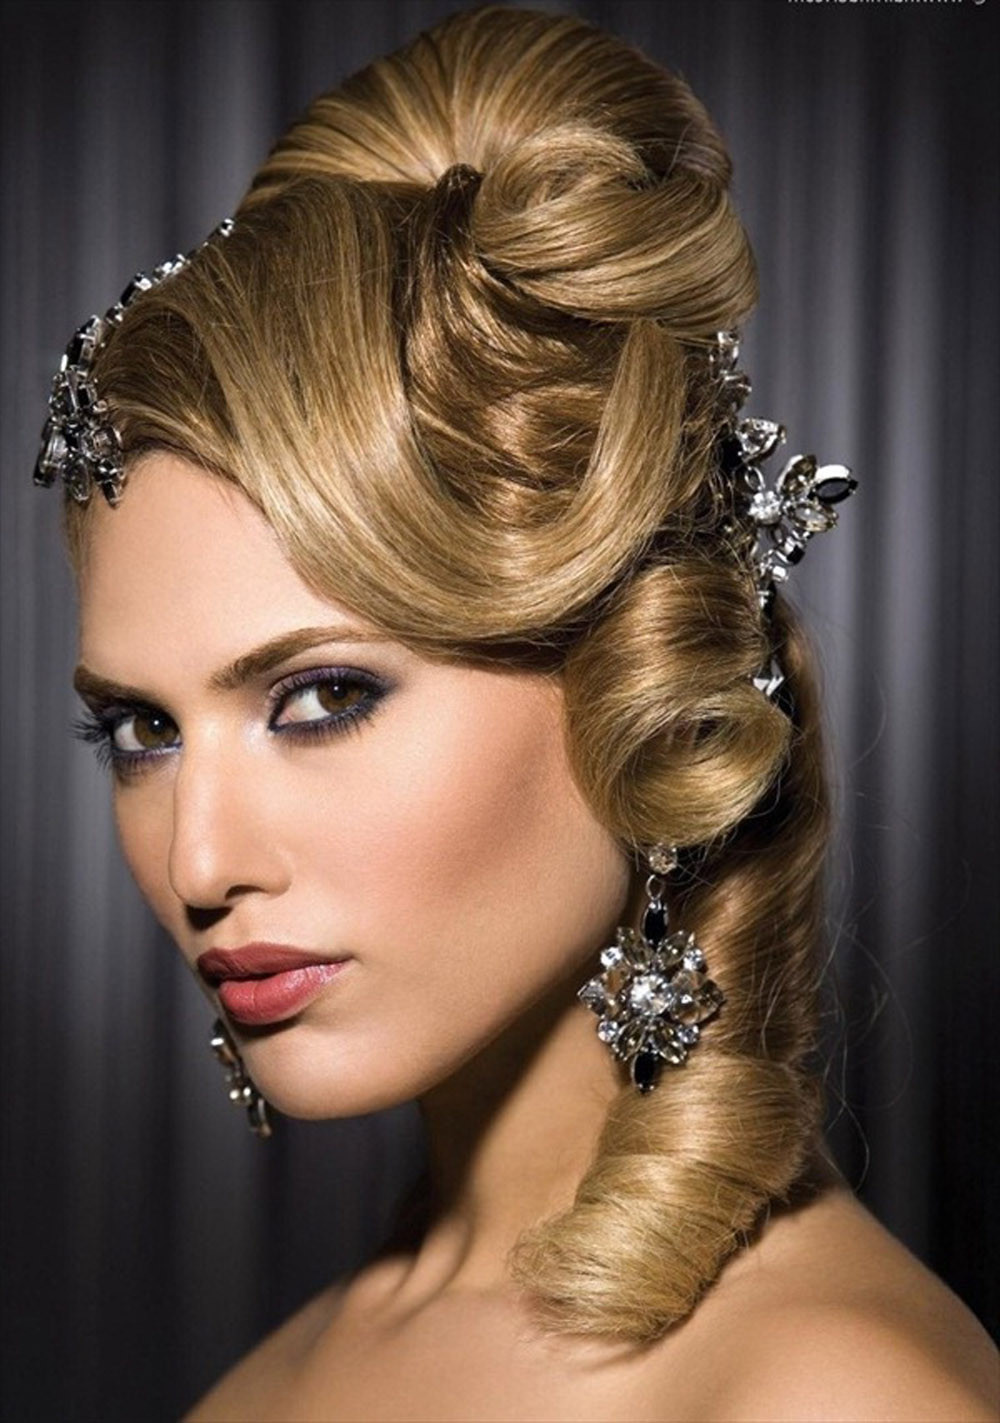 Prom Hairstyle Ideas
 20 Unique Prom Hairstyles Ideas With MagMent